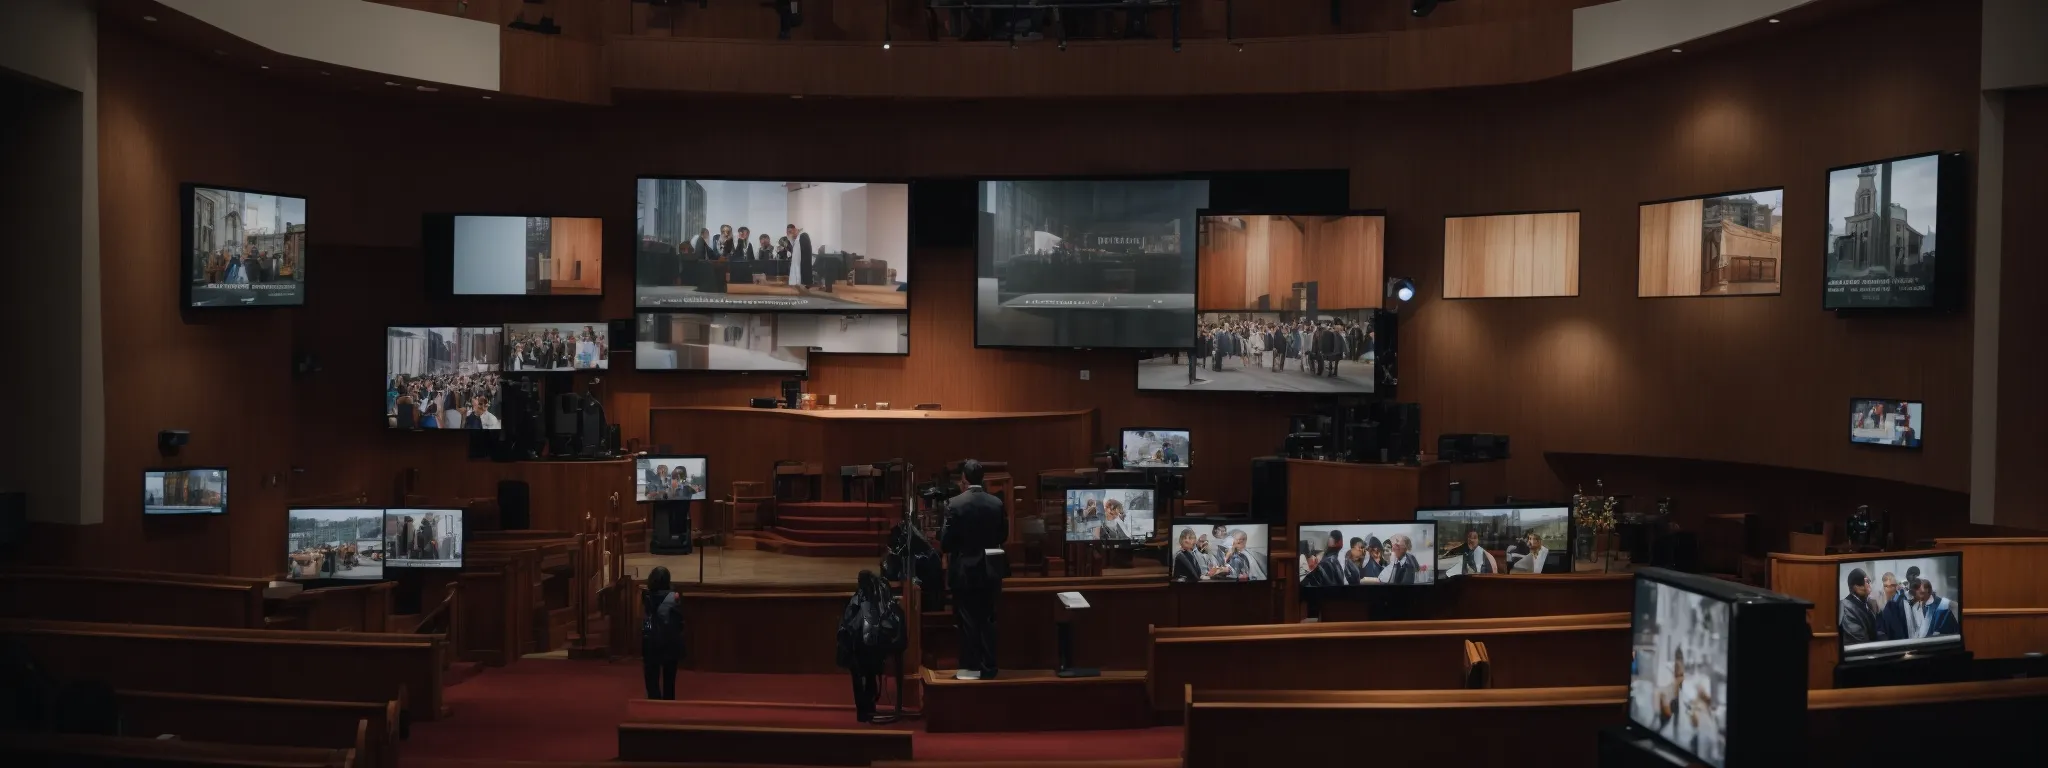 a church service is being live-streamed on a monitor, surrounded by smaller screens displaying a photo gallery and audio player interfaces.